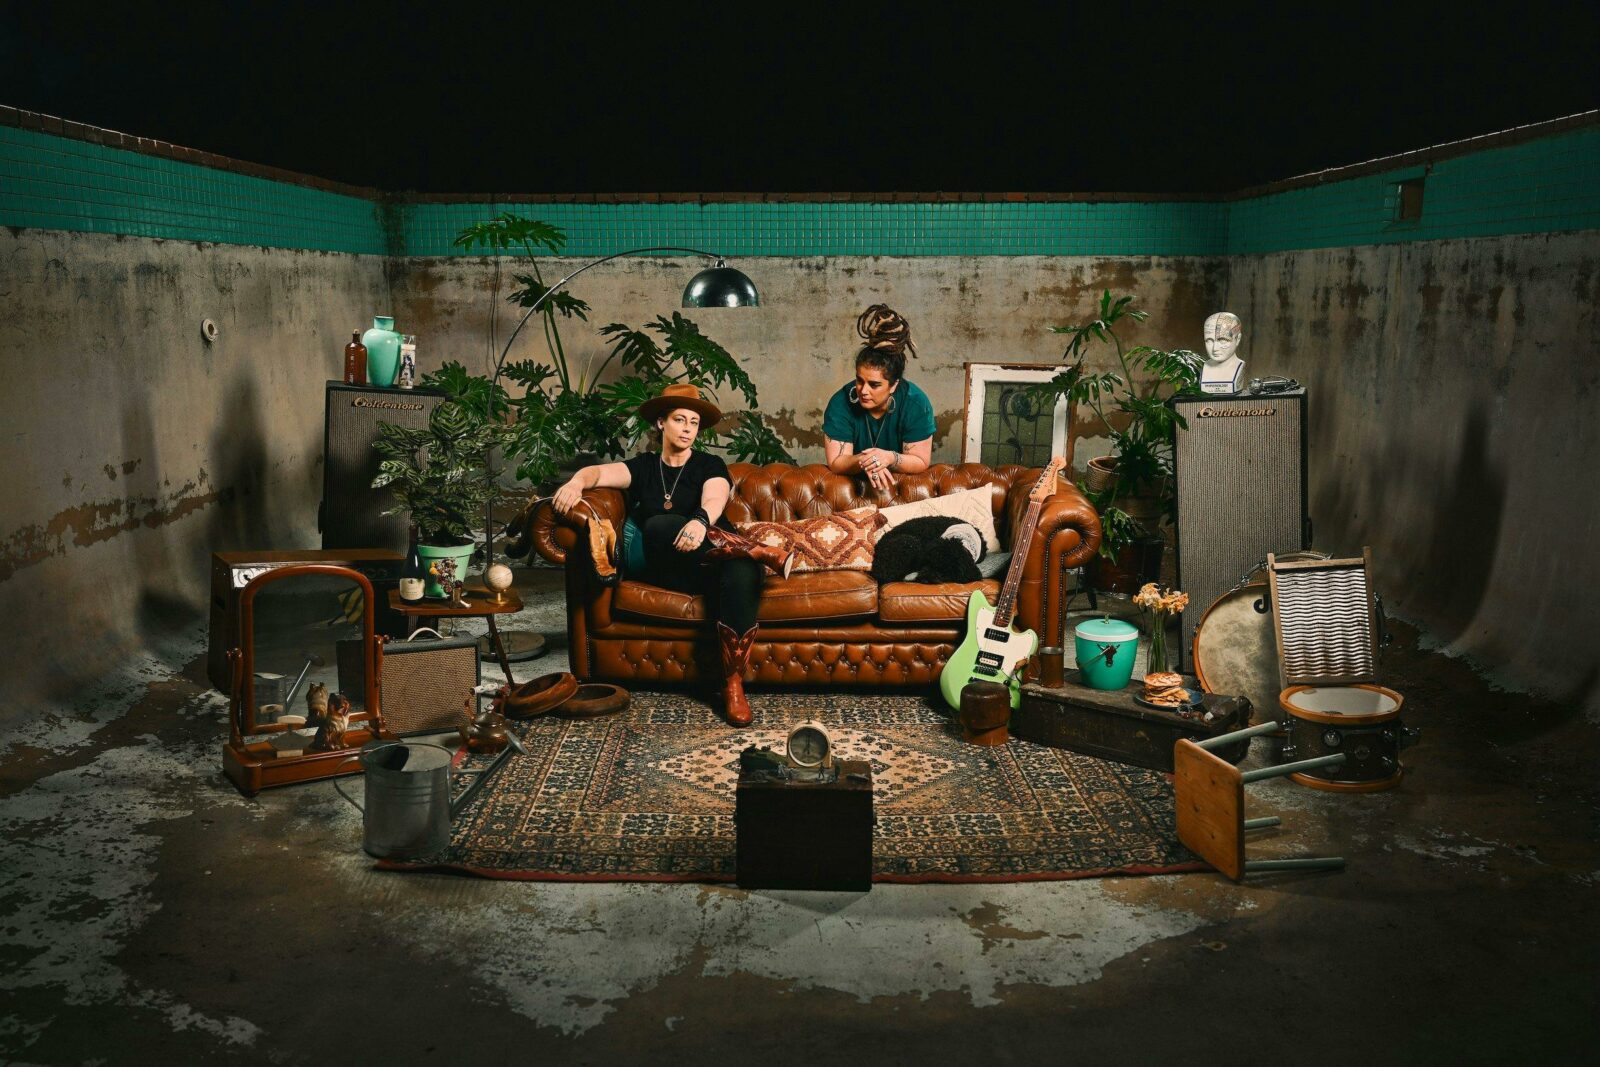 Members of the band This Way North, sitting on a brown couch in a dirty room, with a small tv.